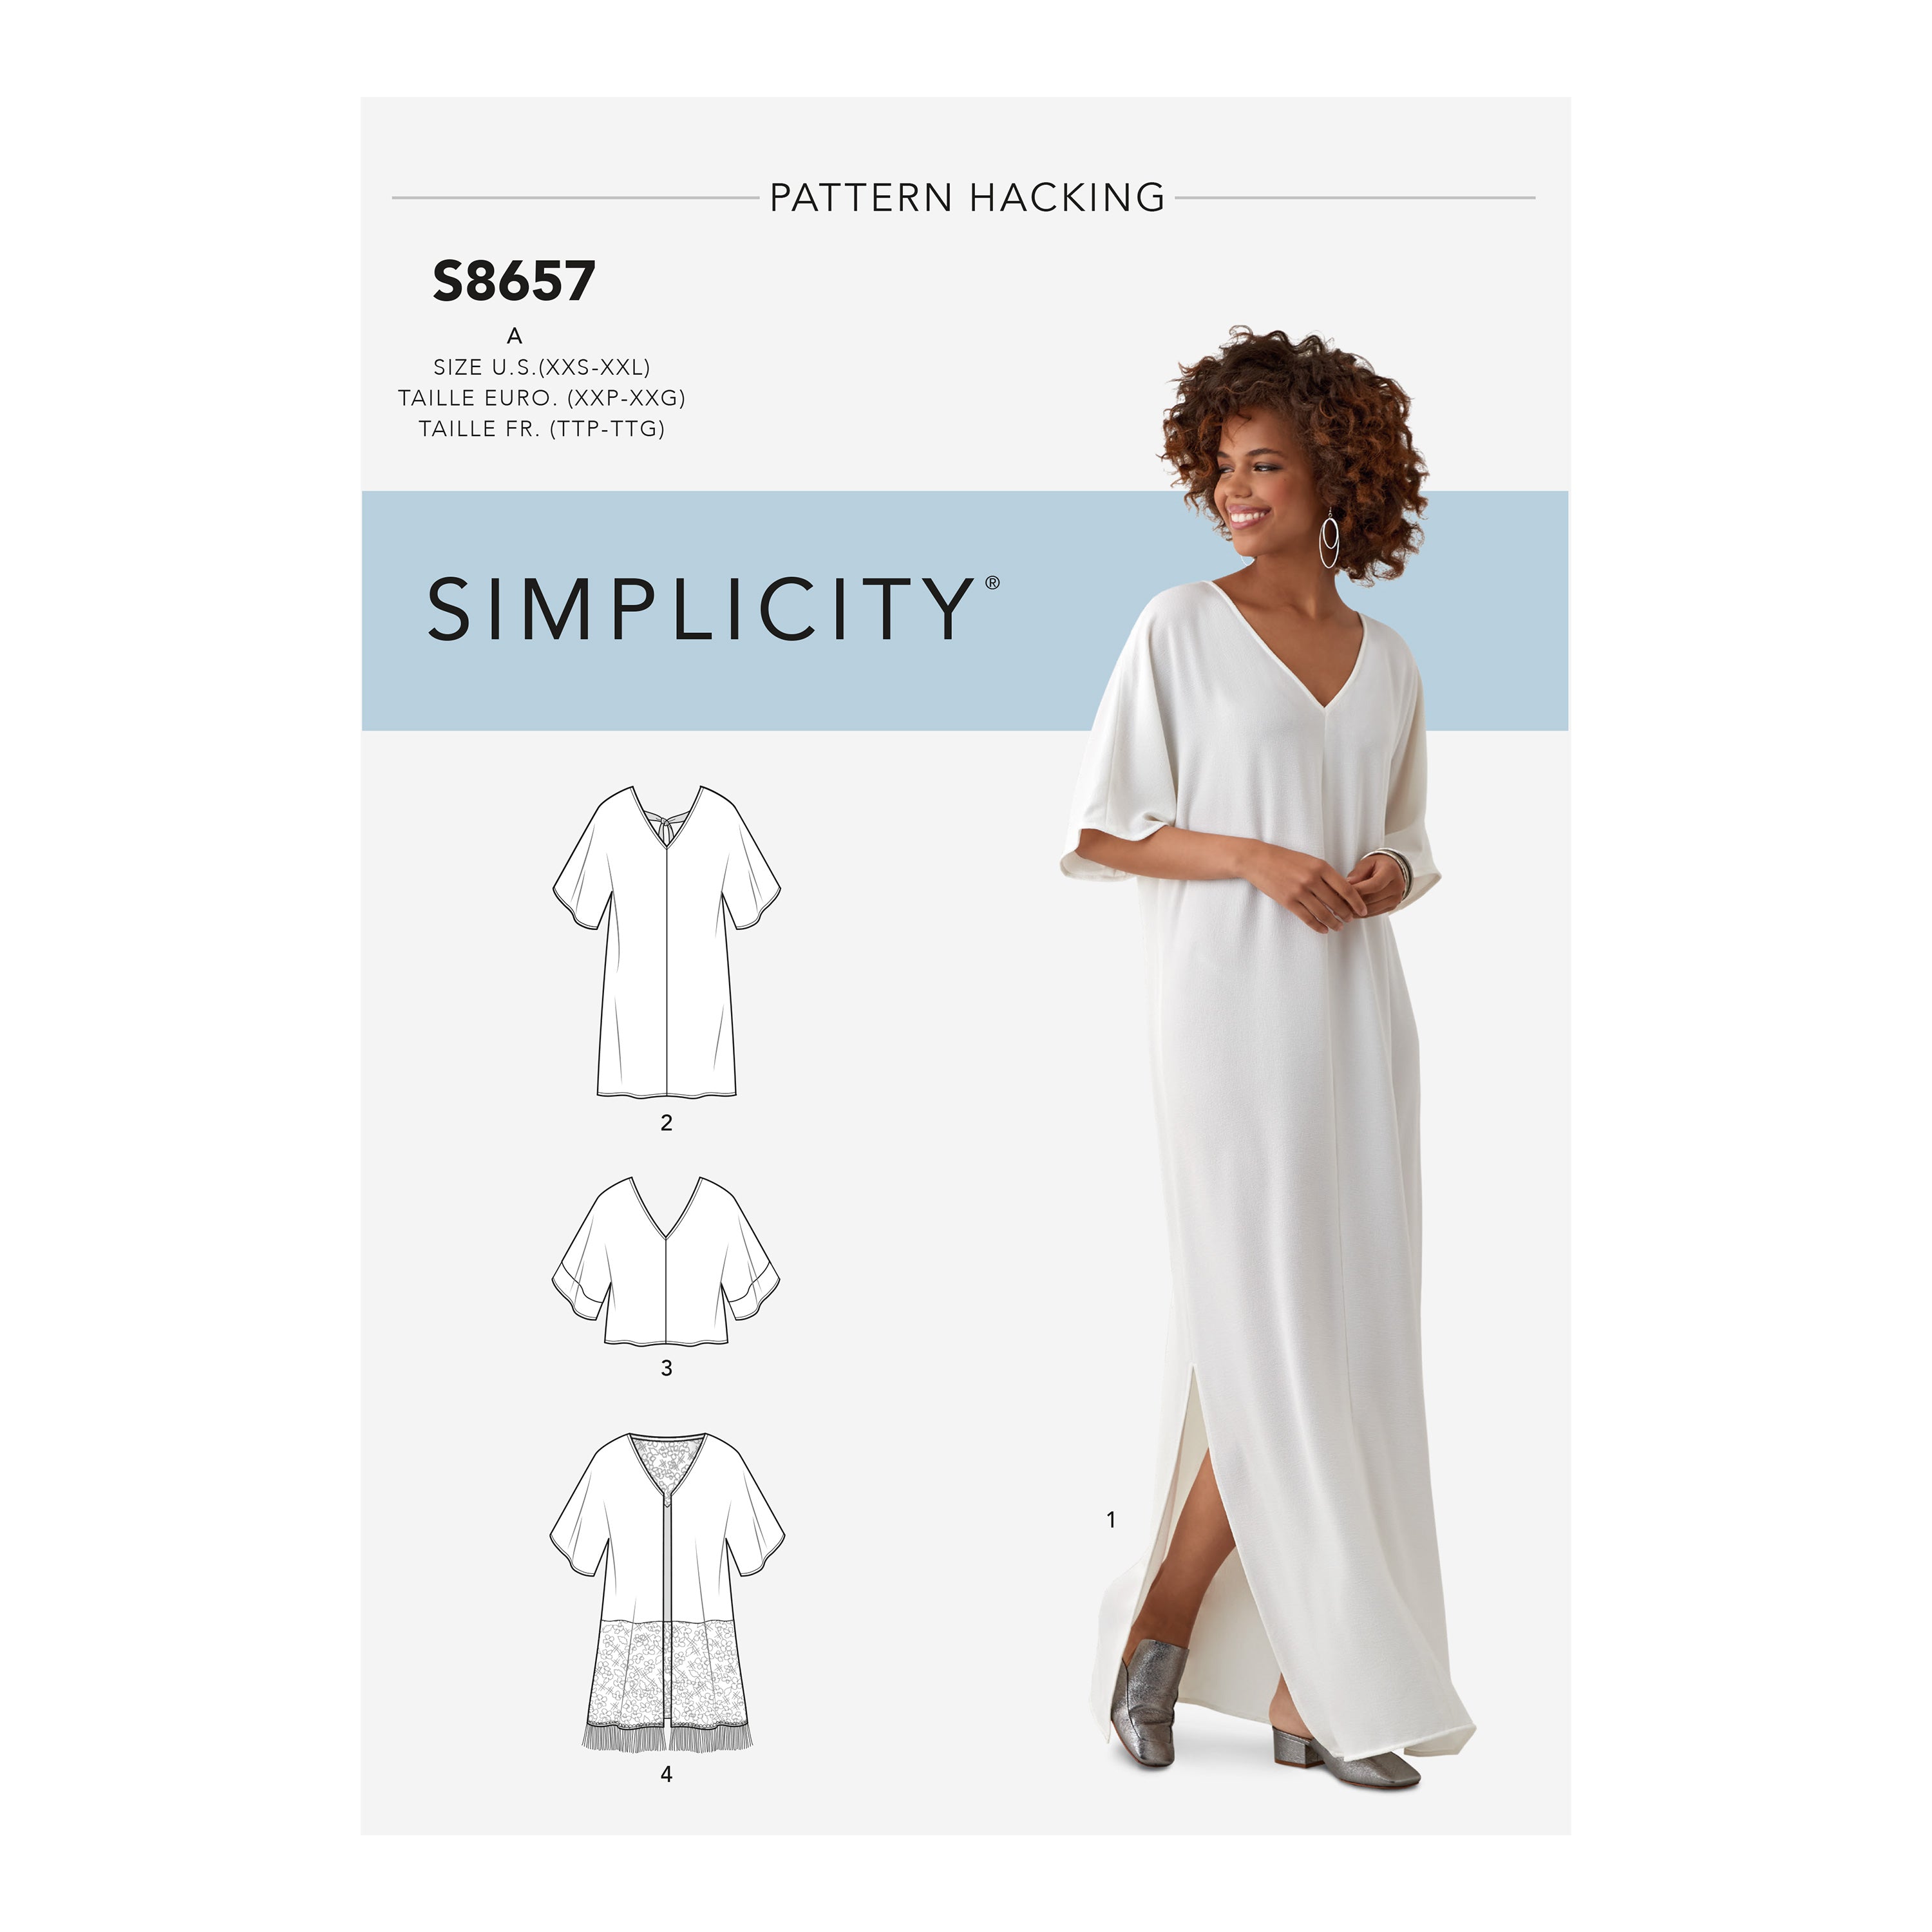 Pattern Review: Simplicity 8378 (Pattern Hacking Line)